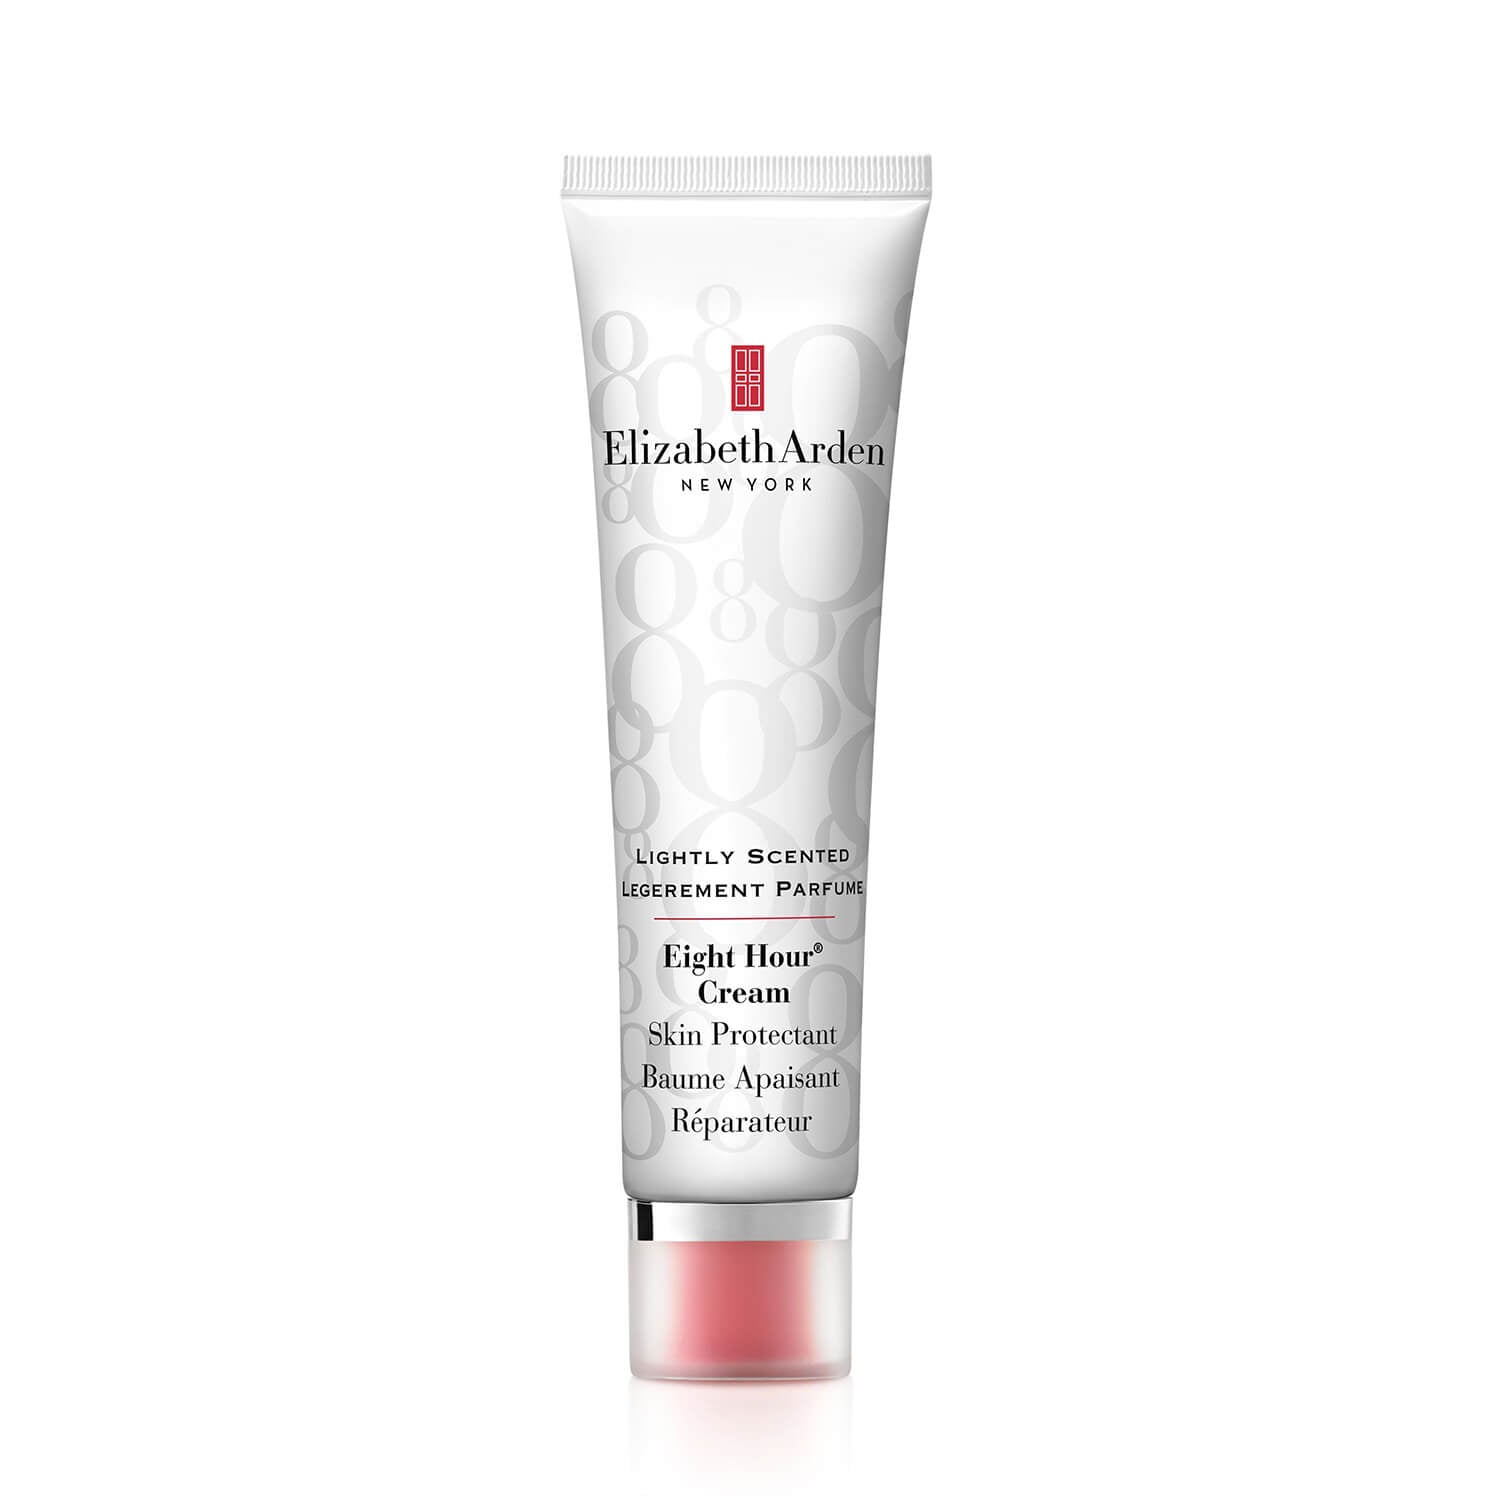 Elizabeth Arden Eight Hour® Cream Skin Protectant Lightly Scented - 50ml 1 Shaws Department Stores